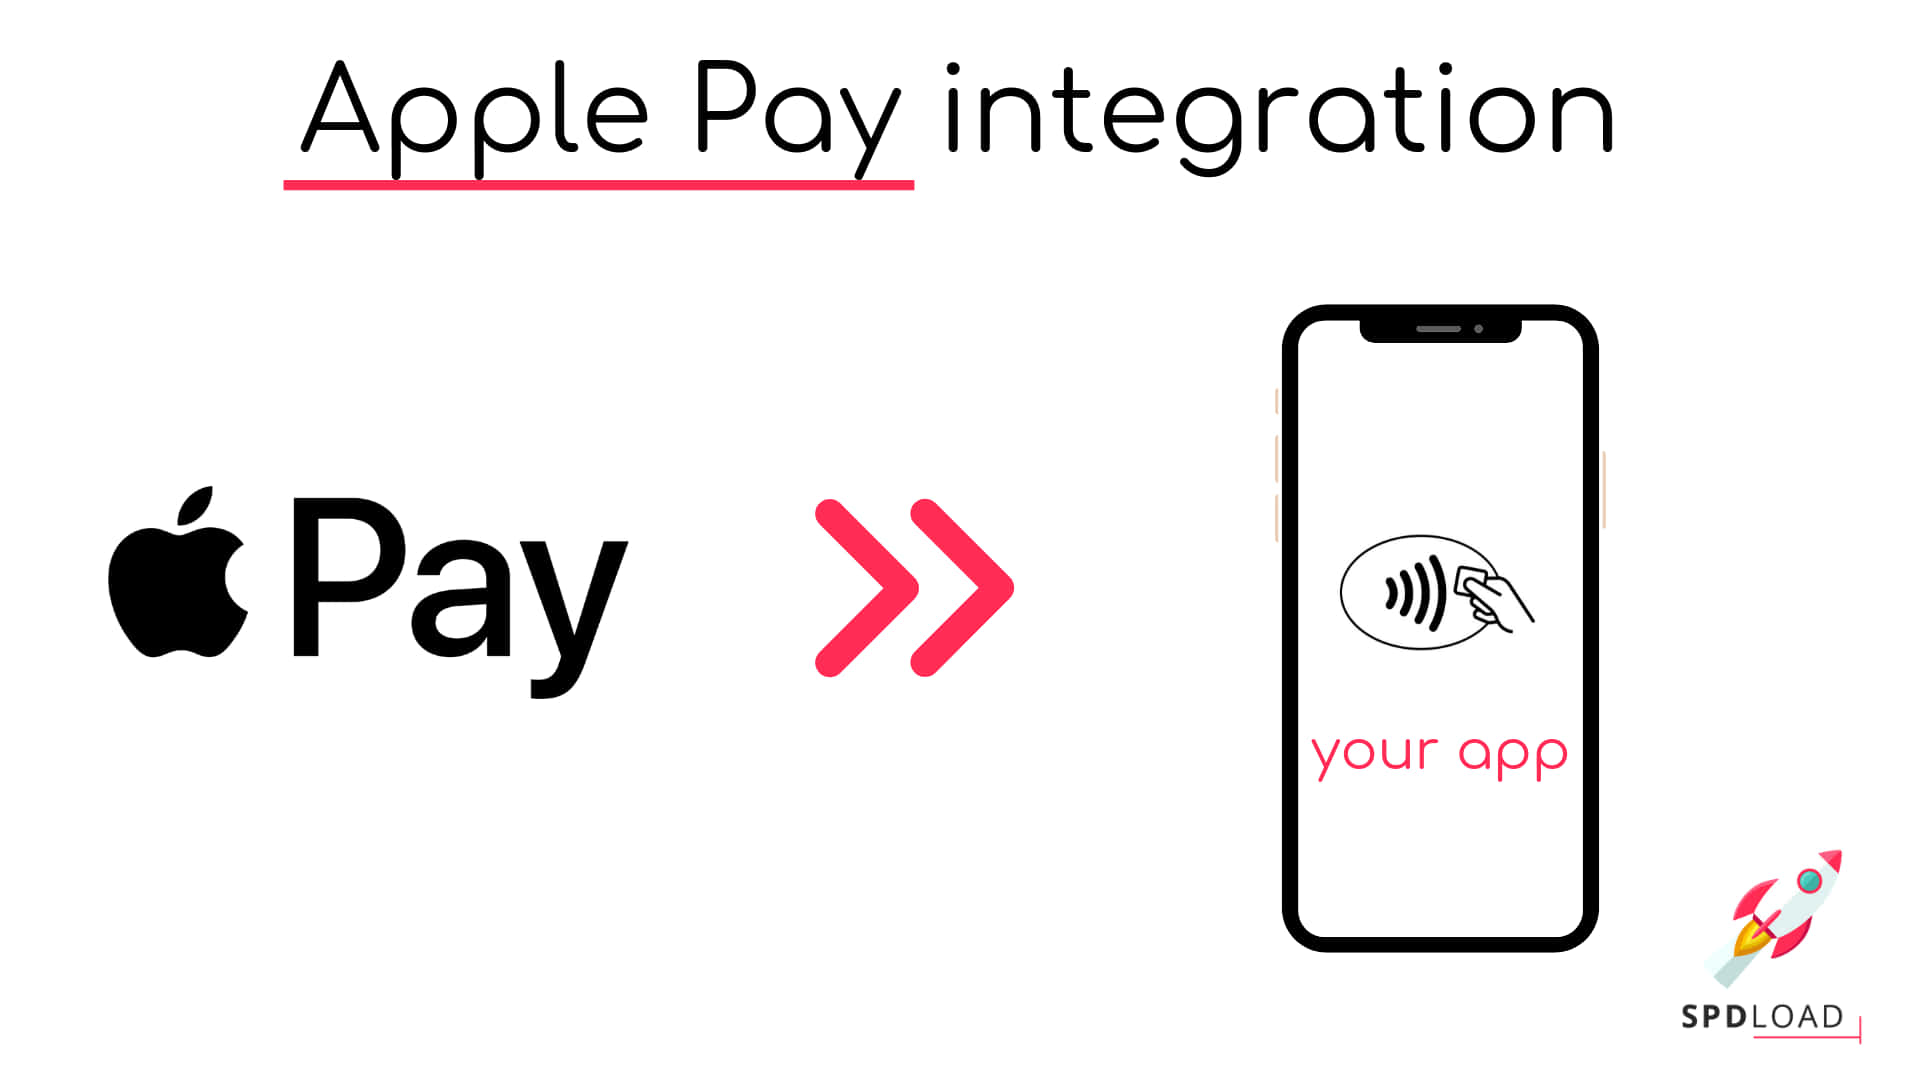 Apple Pay Integration - How To Integrate Apple Pay With Your App